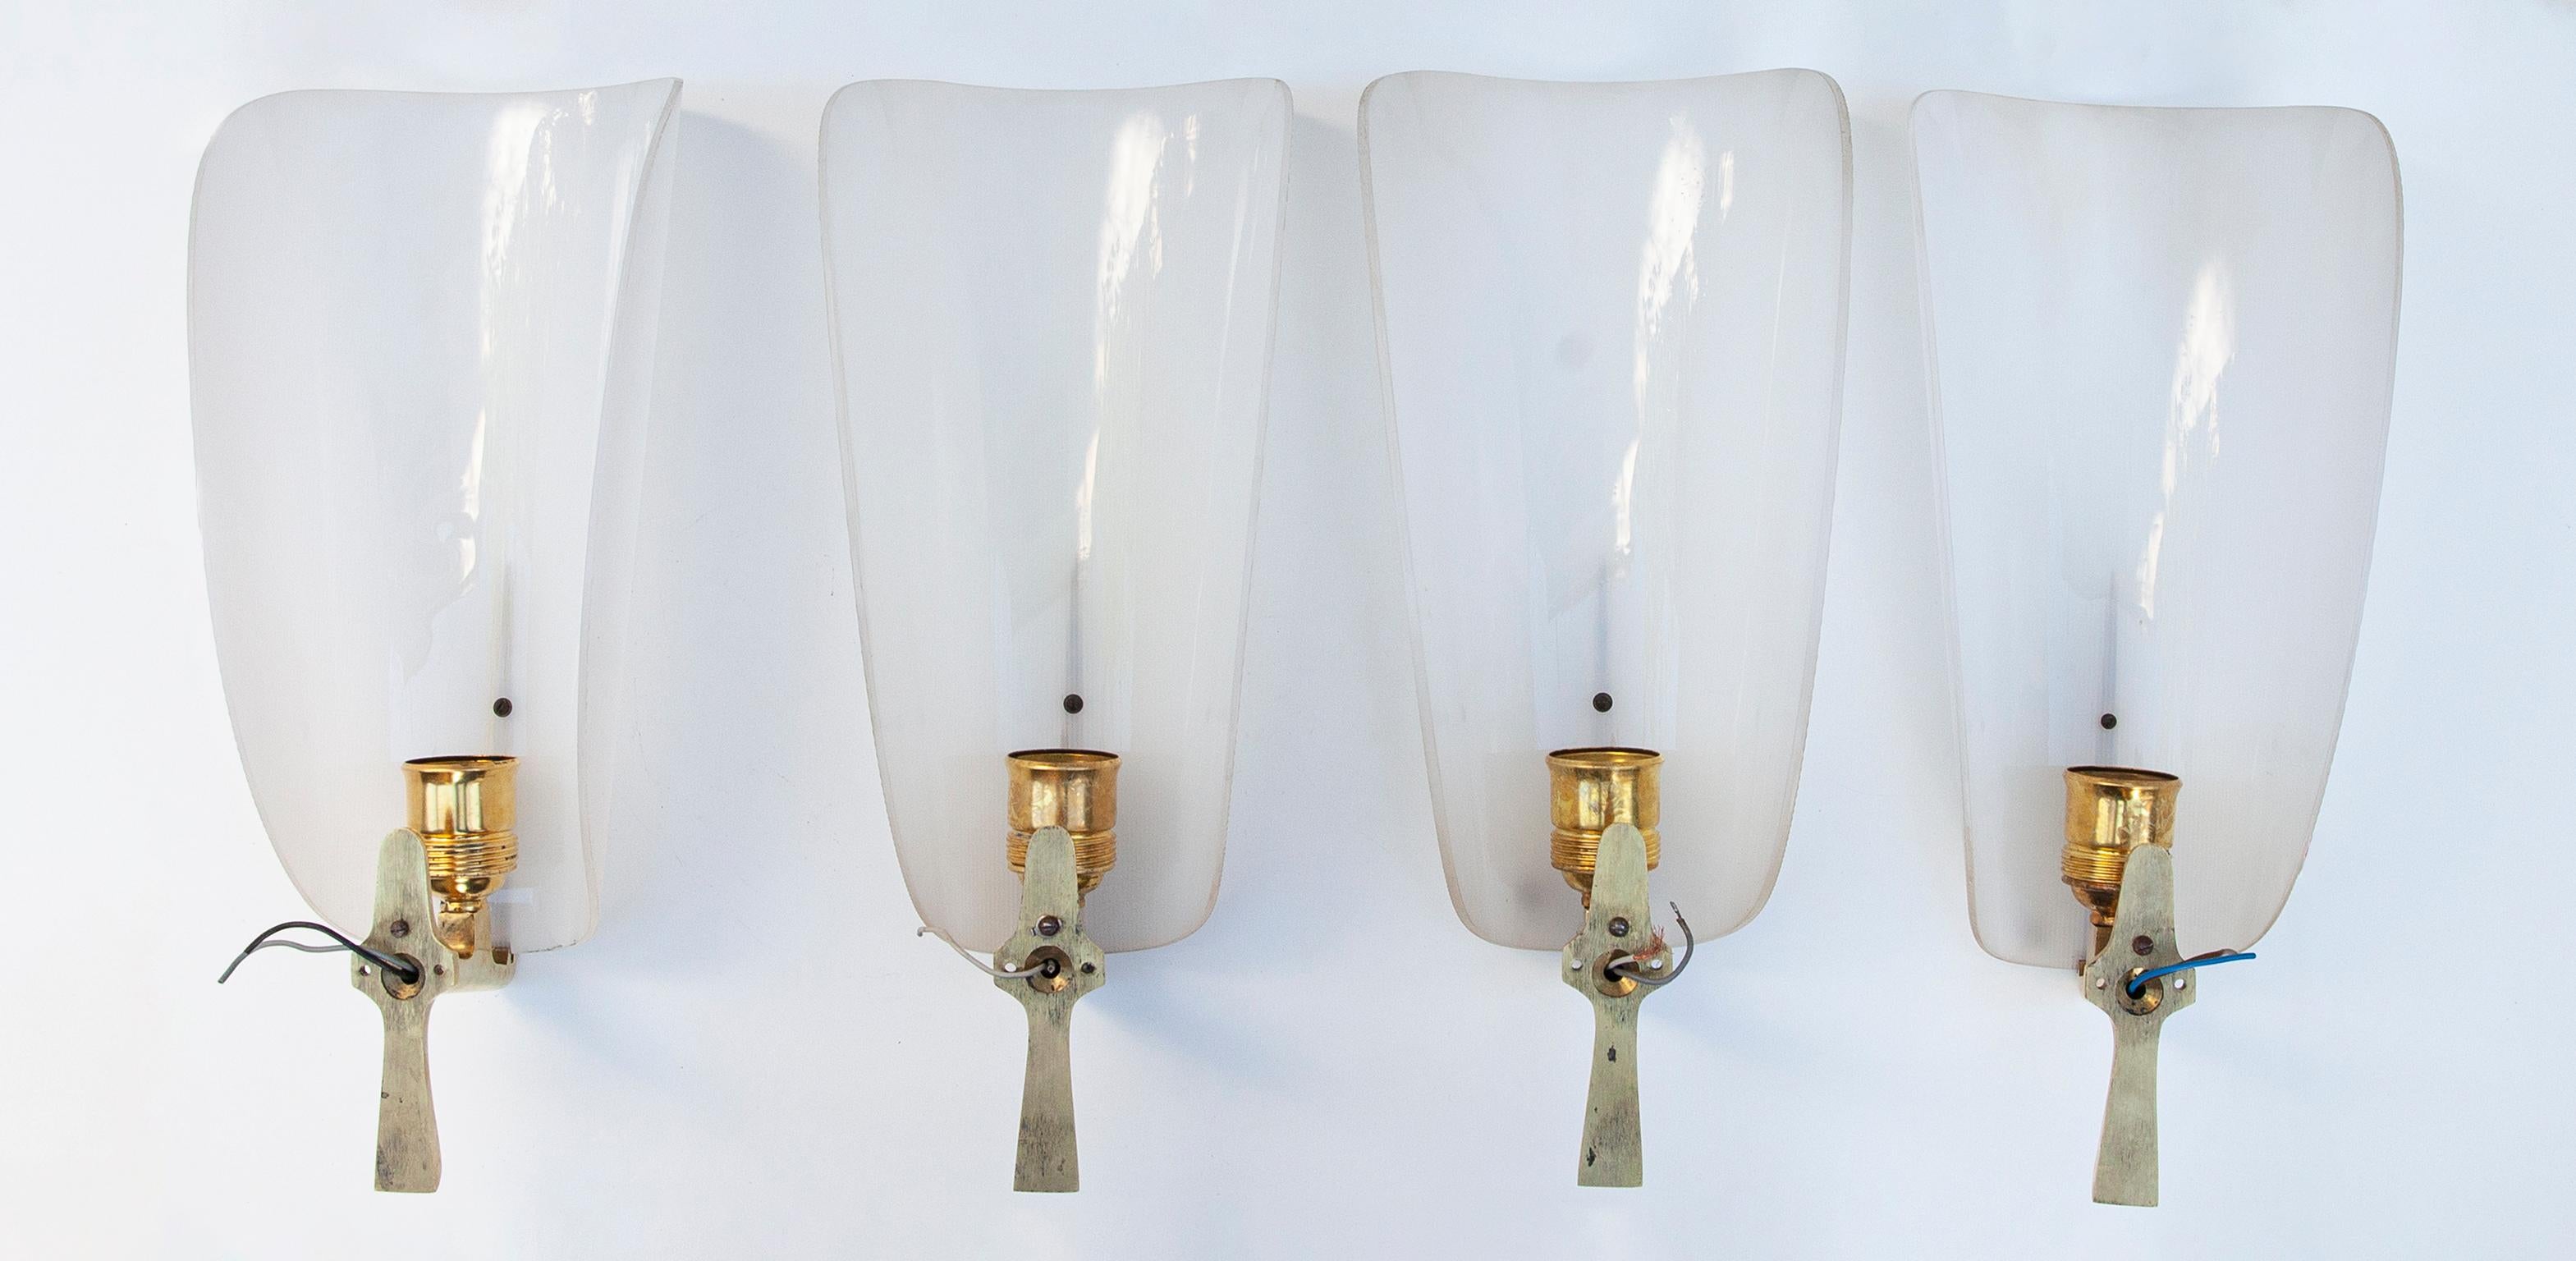 Elegant set of four Maison Arlus wall lamps executed in gilt brass and with a Perspex shade made in France, 1950s. Each lamp has one E24 socket and they are in very good condition.

Measures: 38 H x 16 B x 12 D cm.